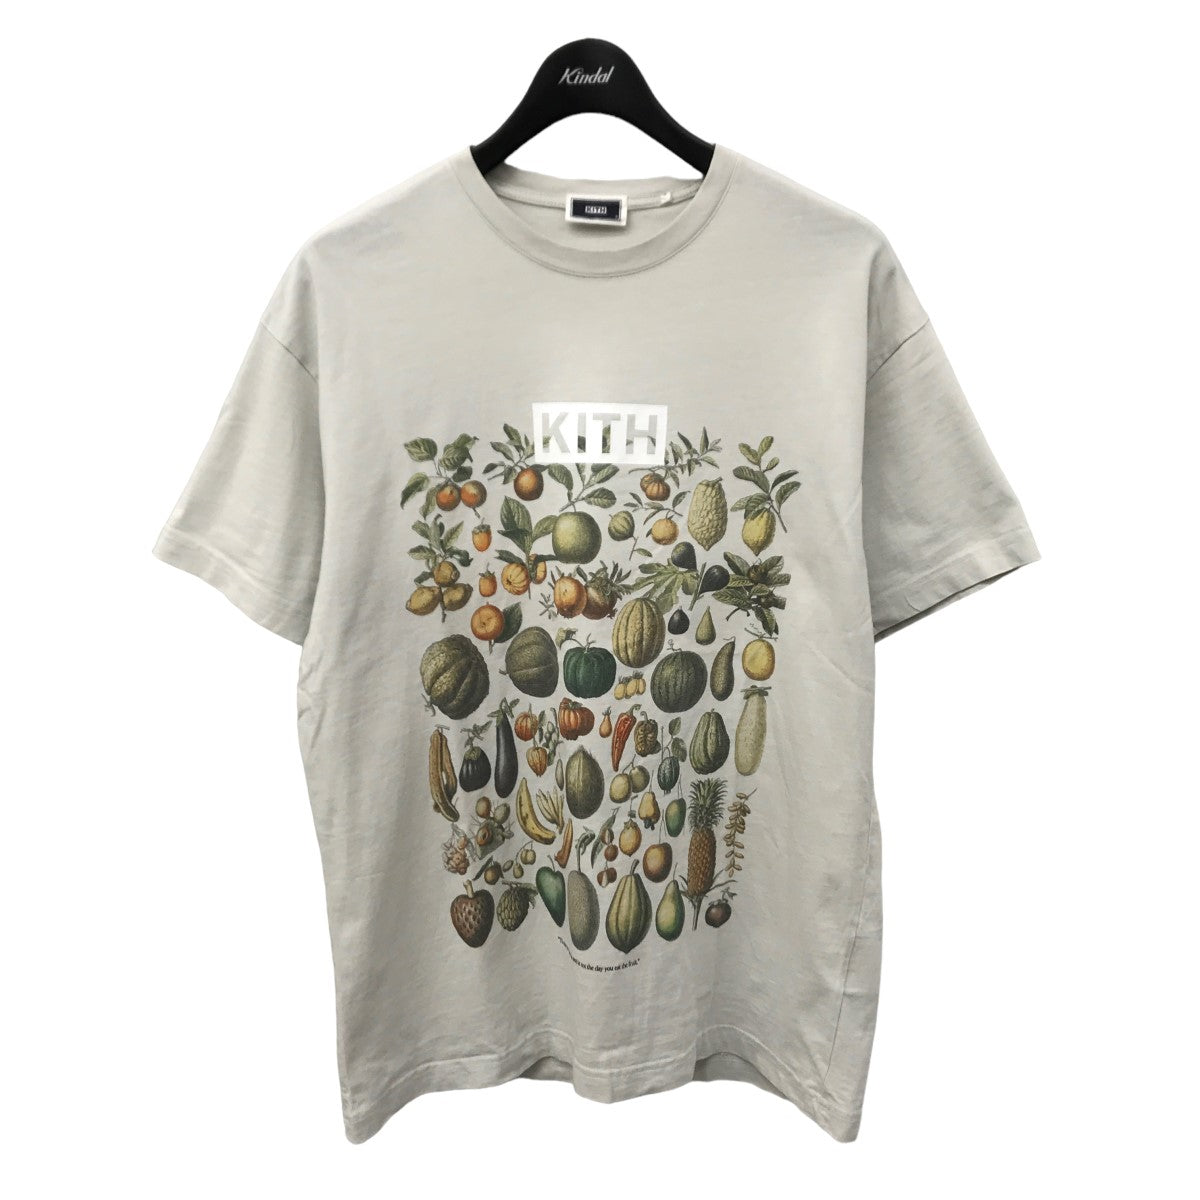 KITH(キス) 22SS Growth in Time Vintage Tee プリントTシャツ ペール ...